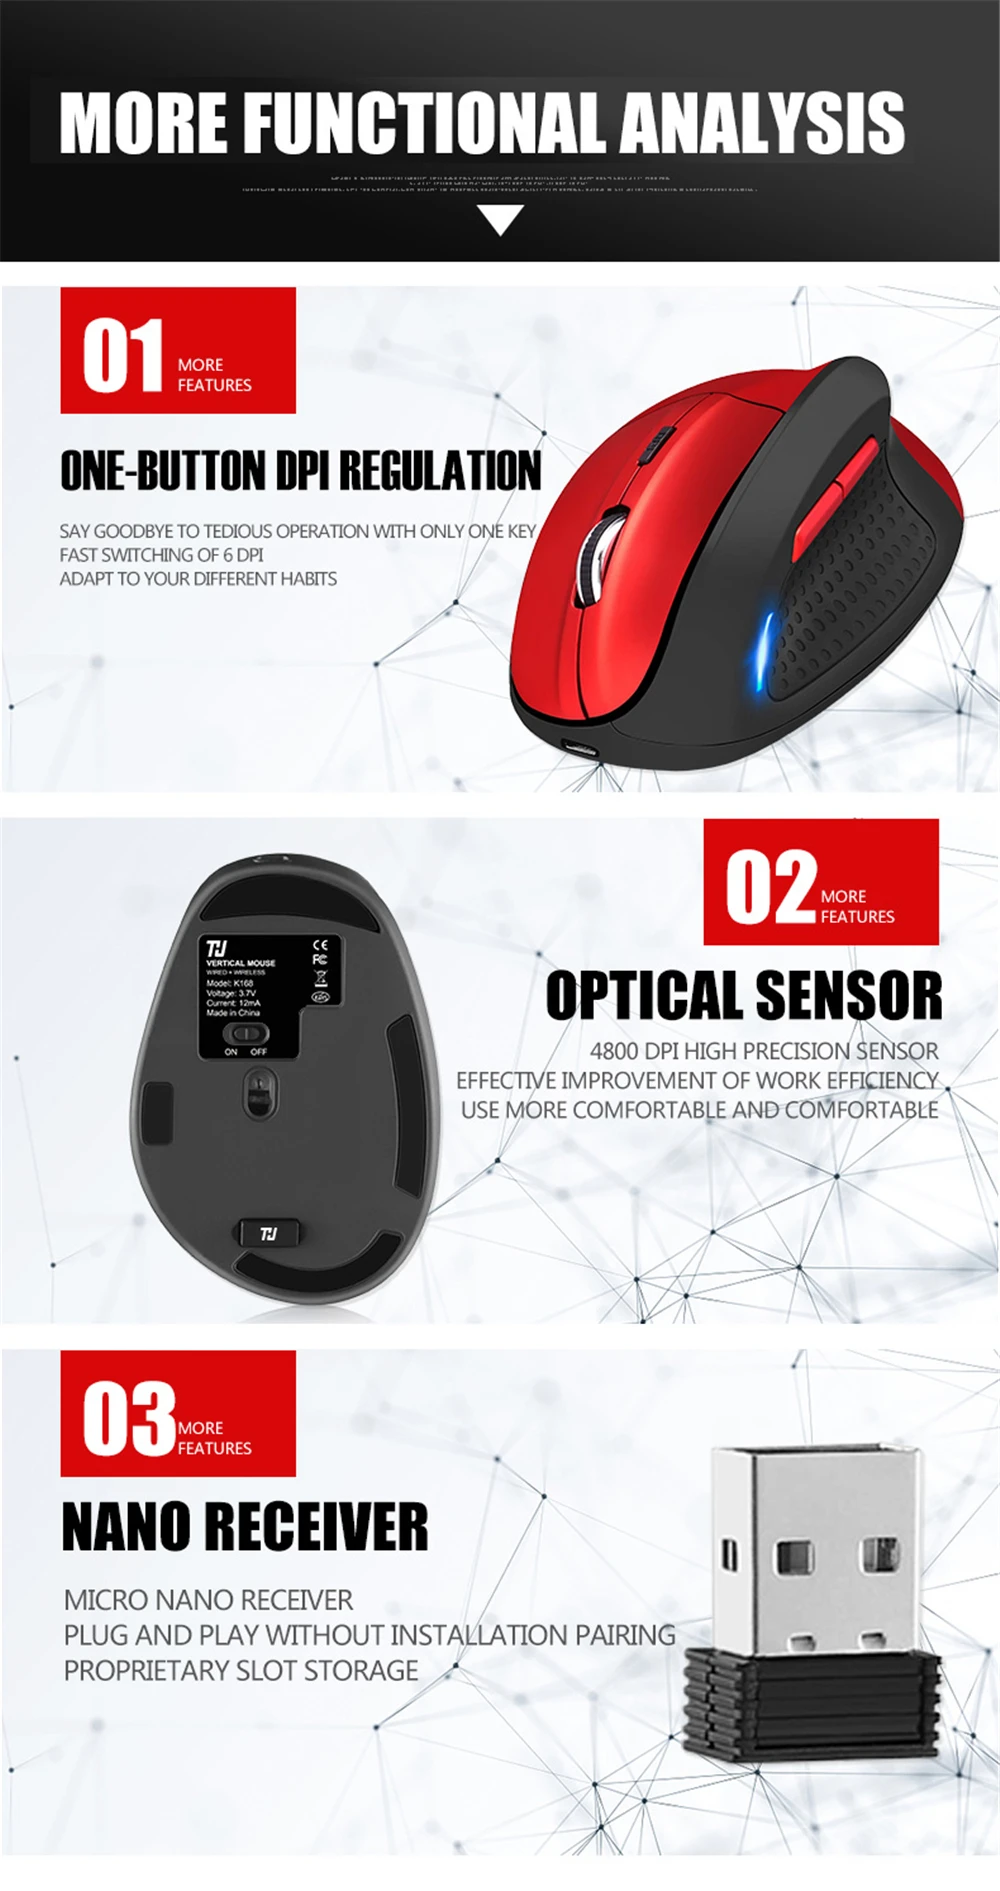 2.4G Wireless Mouse Rechargeable Ergonomic Vertical Gaming Mouse 6 DPI Level Up To 4800DPI for PC Laptop MacBook THU 19